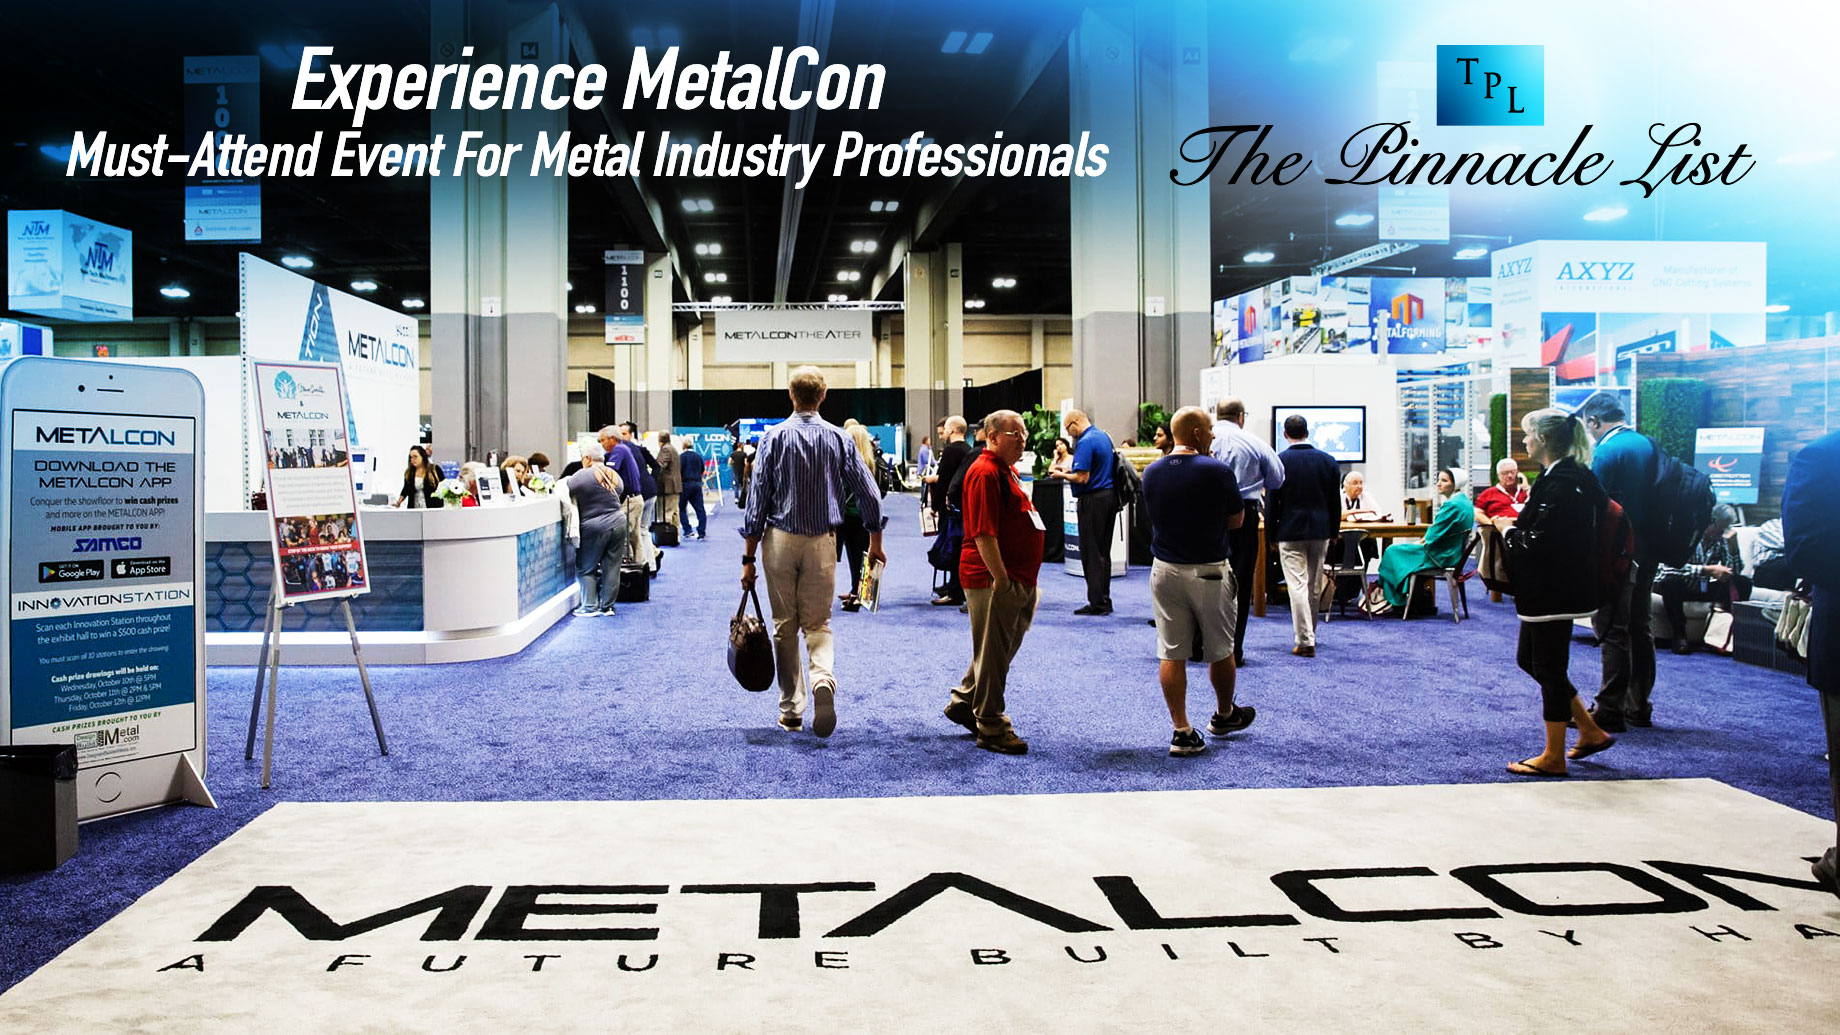 Experience MetalCon: The Must-Attend Event For Metal Industry Professionals